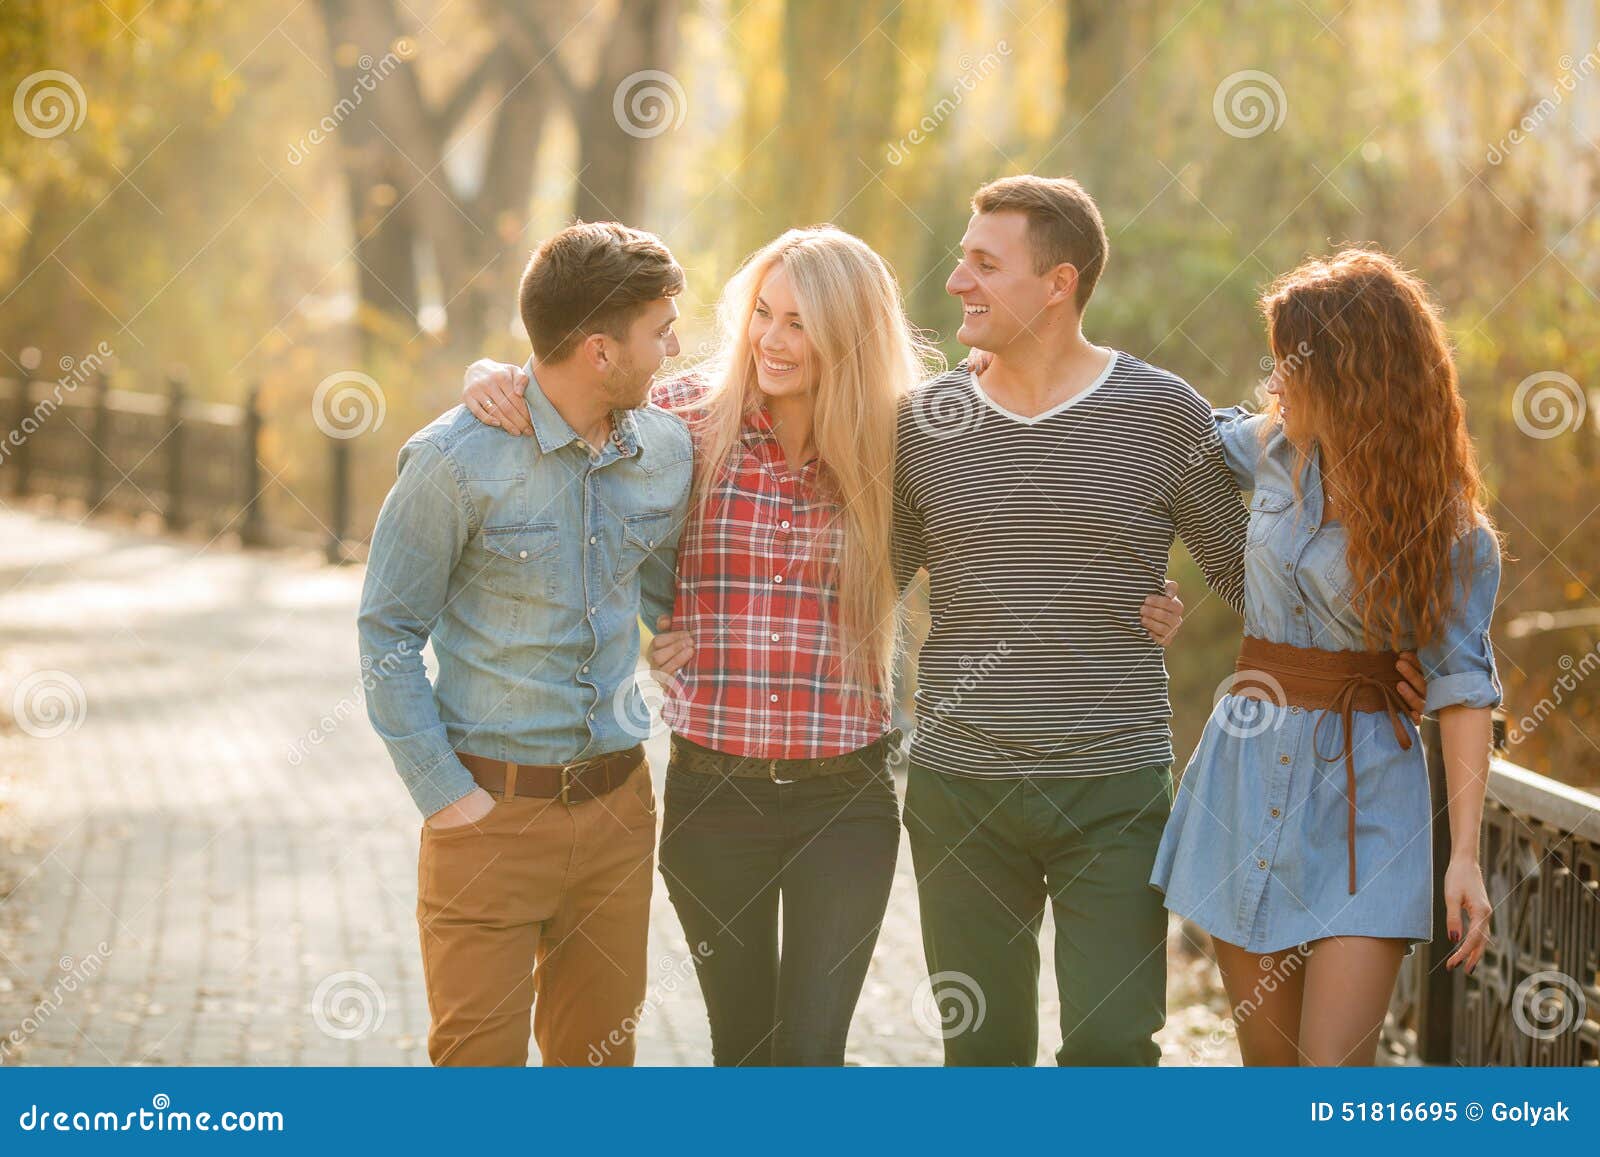 Four Good Friends Relax and Have Fun in Autumn Park. Stock Image ...